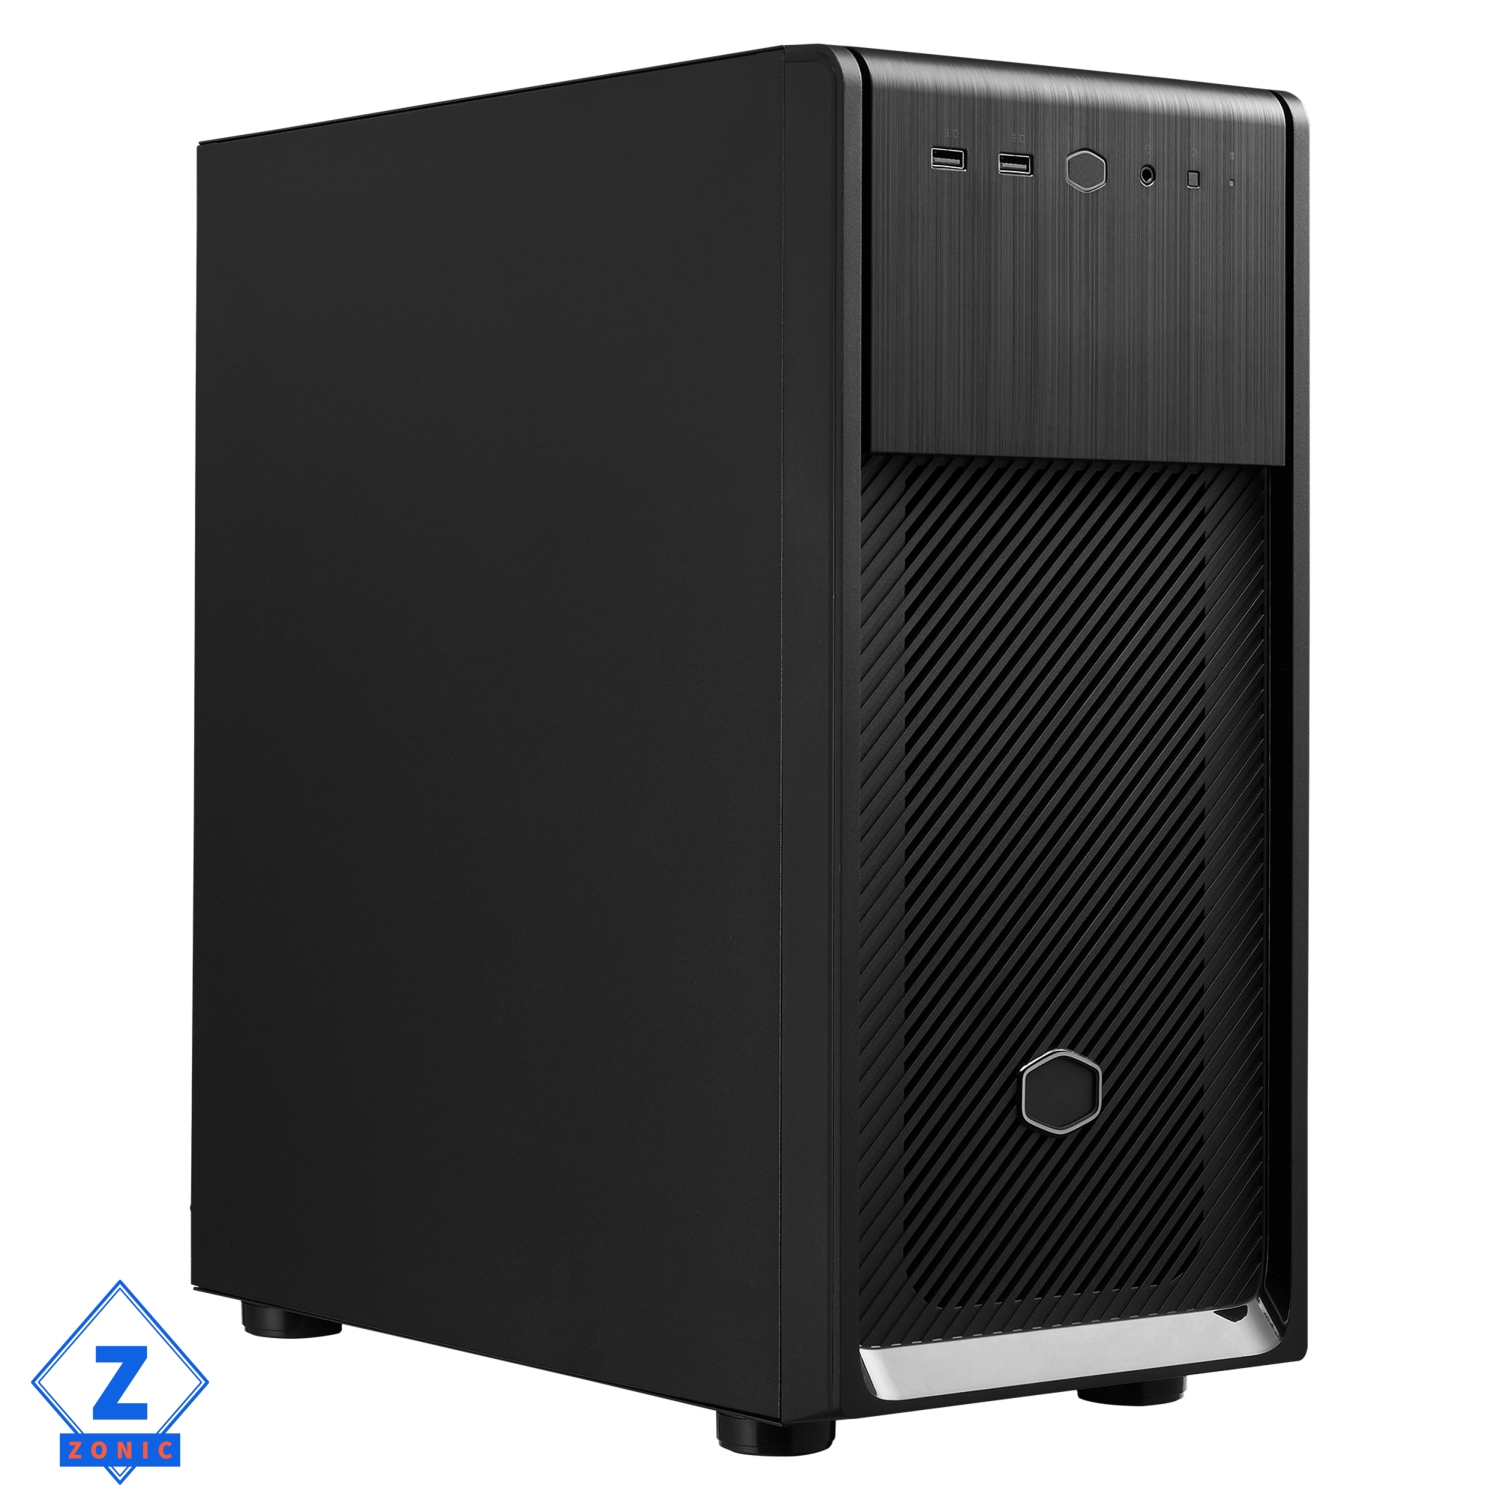 Zonic Business Custom PC, Intel Core i9-12900K, 16 Cores, 1 TB NVME SSD + 4 TB HD , 32 GB RAM, Build in Wi-Fi, Keyboard, and Mouse, Windows 11 Pro